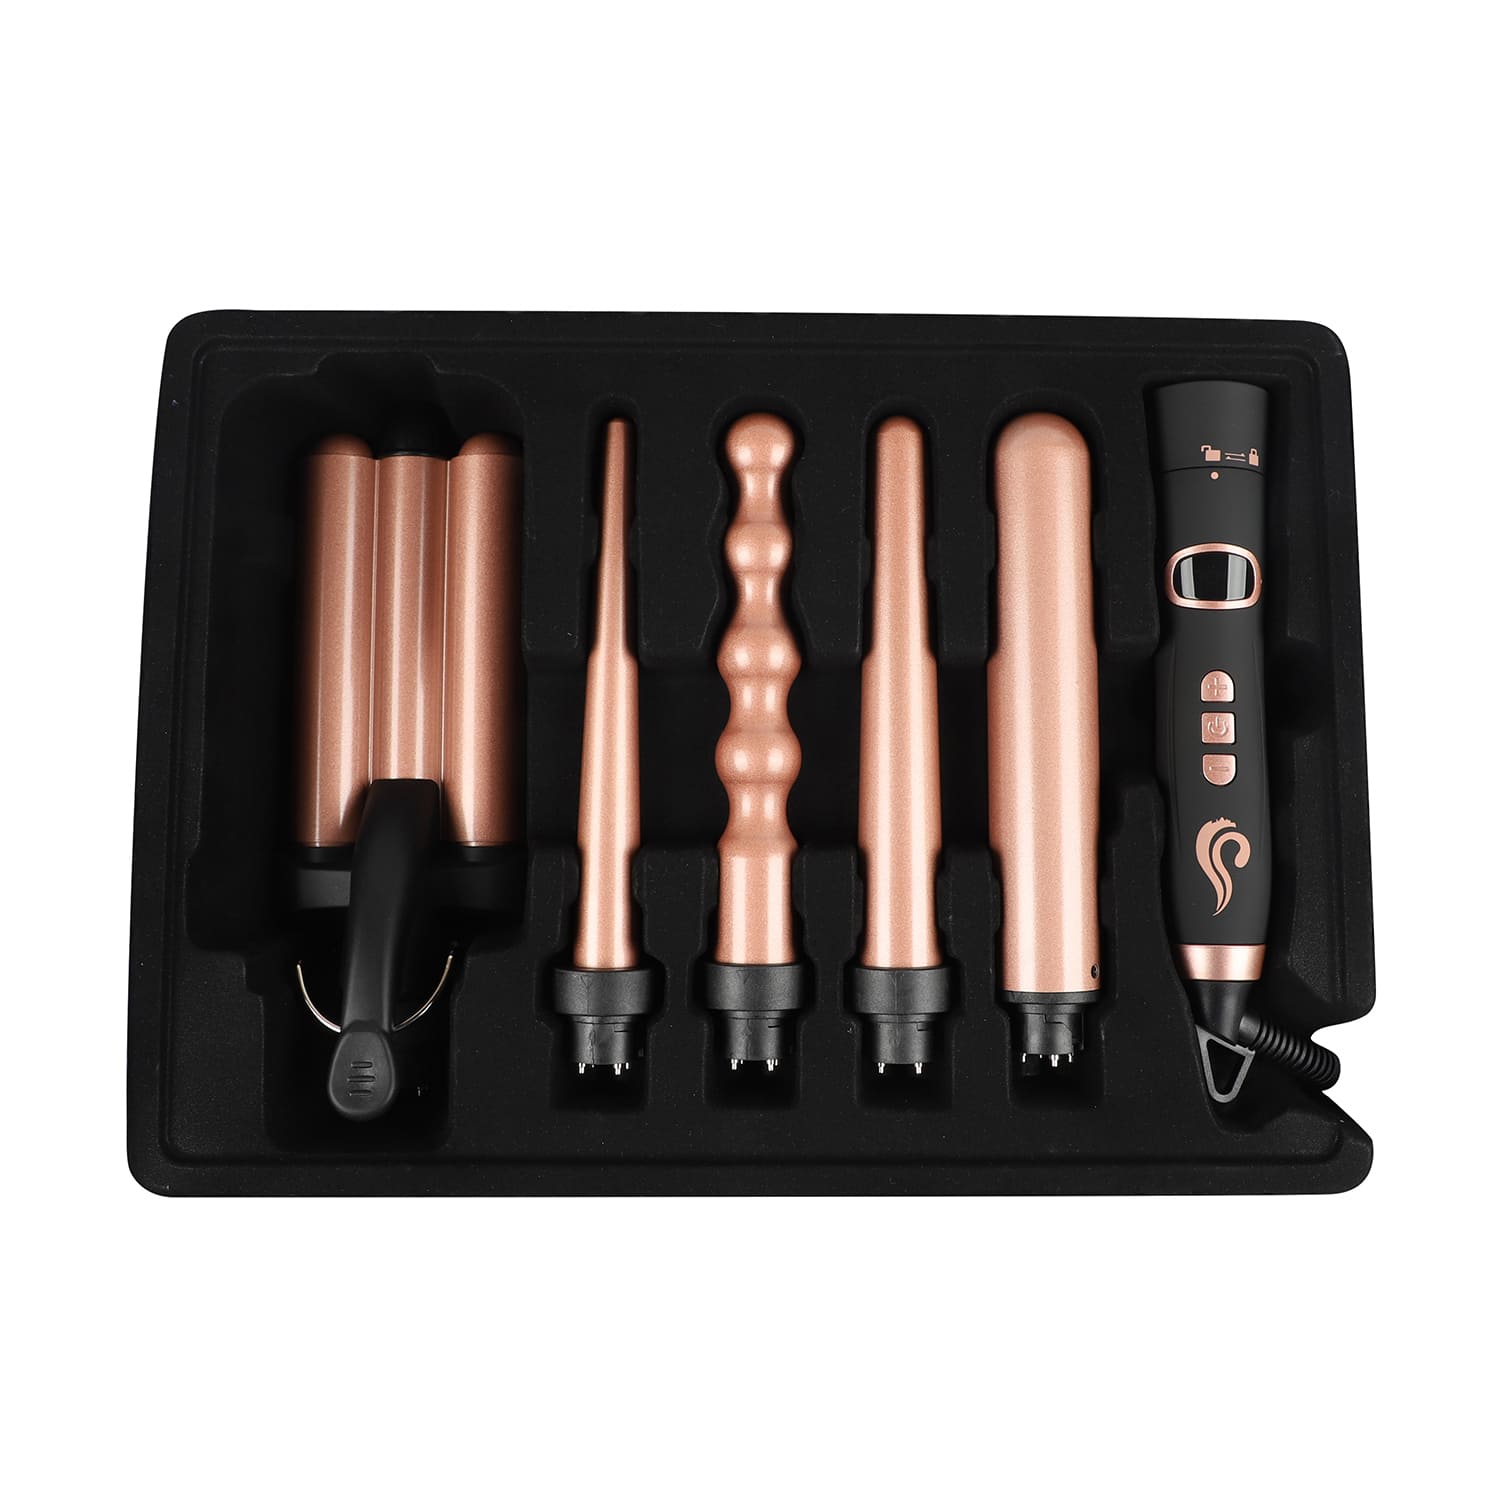 5 in 1 Hot Hair Styling Tool Set